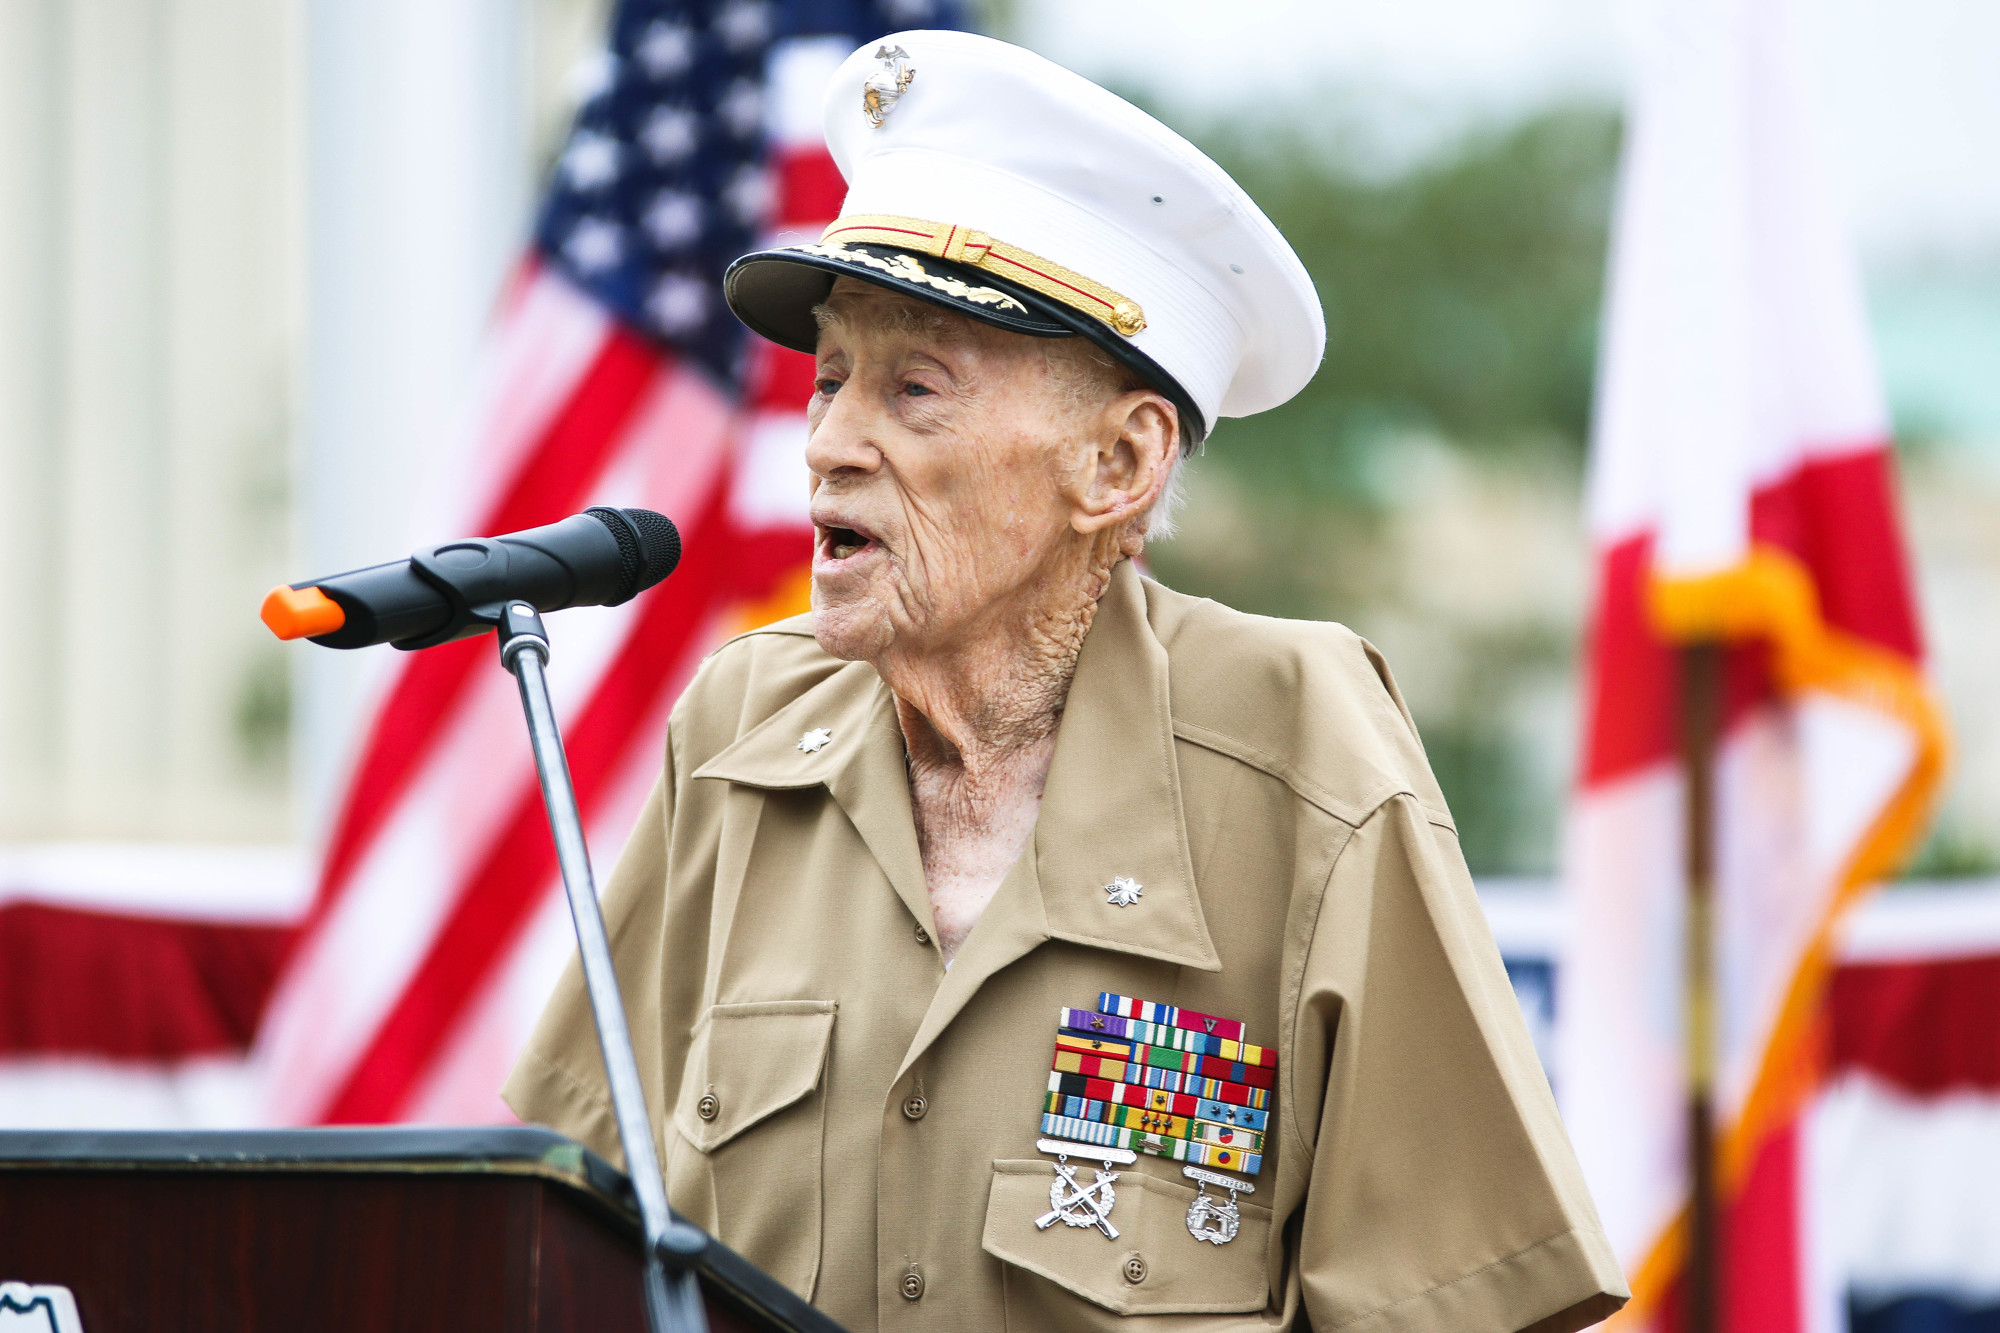 “I have to say, I’m somewhat overwhelmed by the presentation of this, and I accept it very graciously,” said U.S. Marine Corps veteran Bob Bey after receiving a Quilt of Valor.